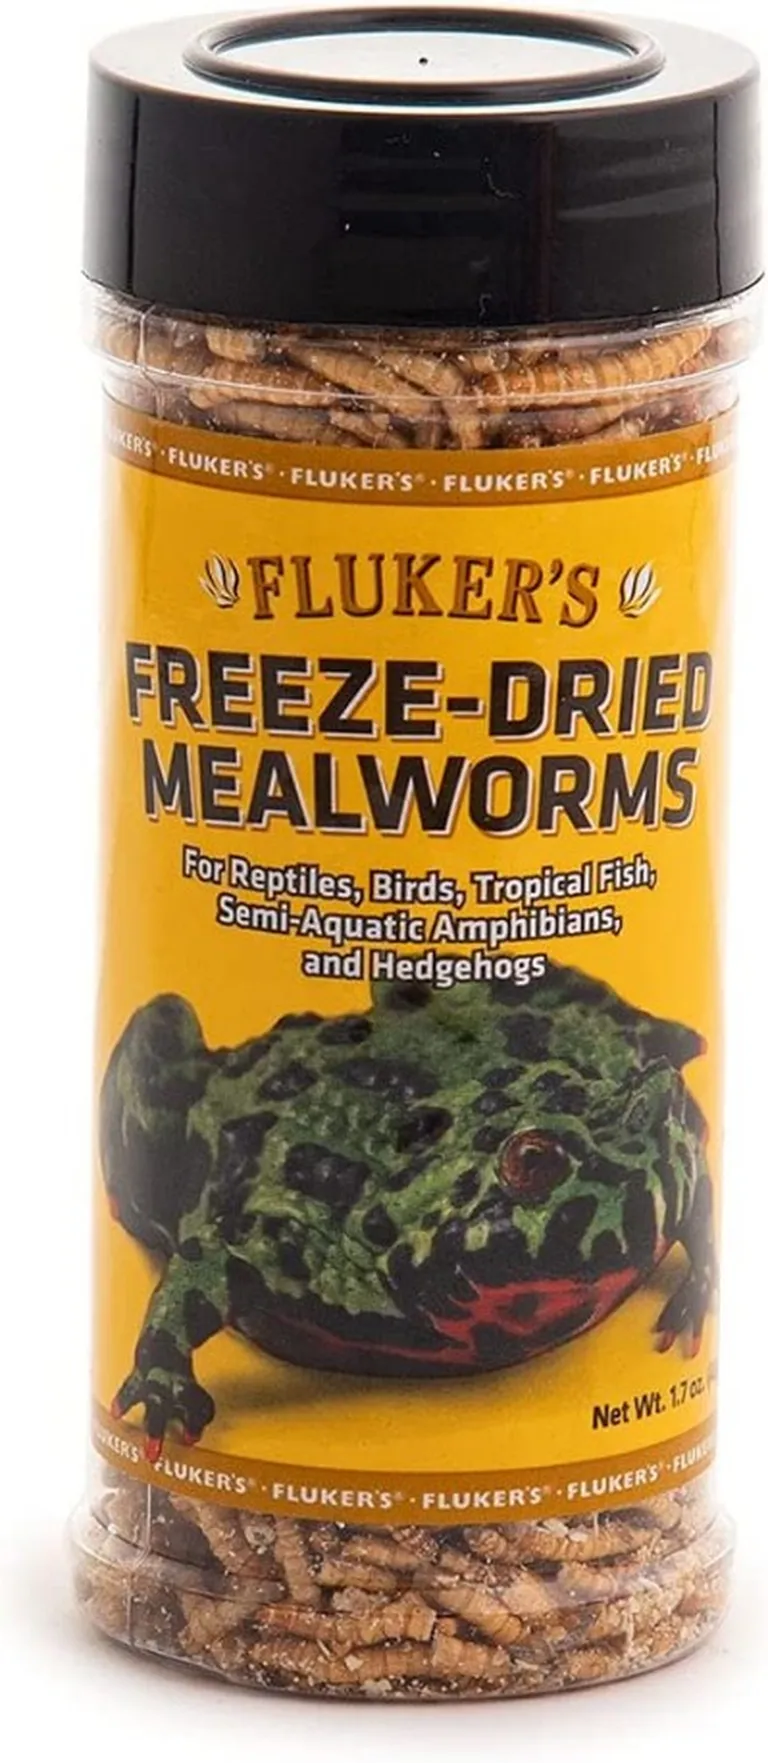 Flukers Freeze-Dried Mealworms for Reptiles, Birds, Tropical Fish, Amphibians and Hedgehogs Photo 2